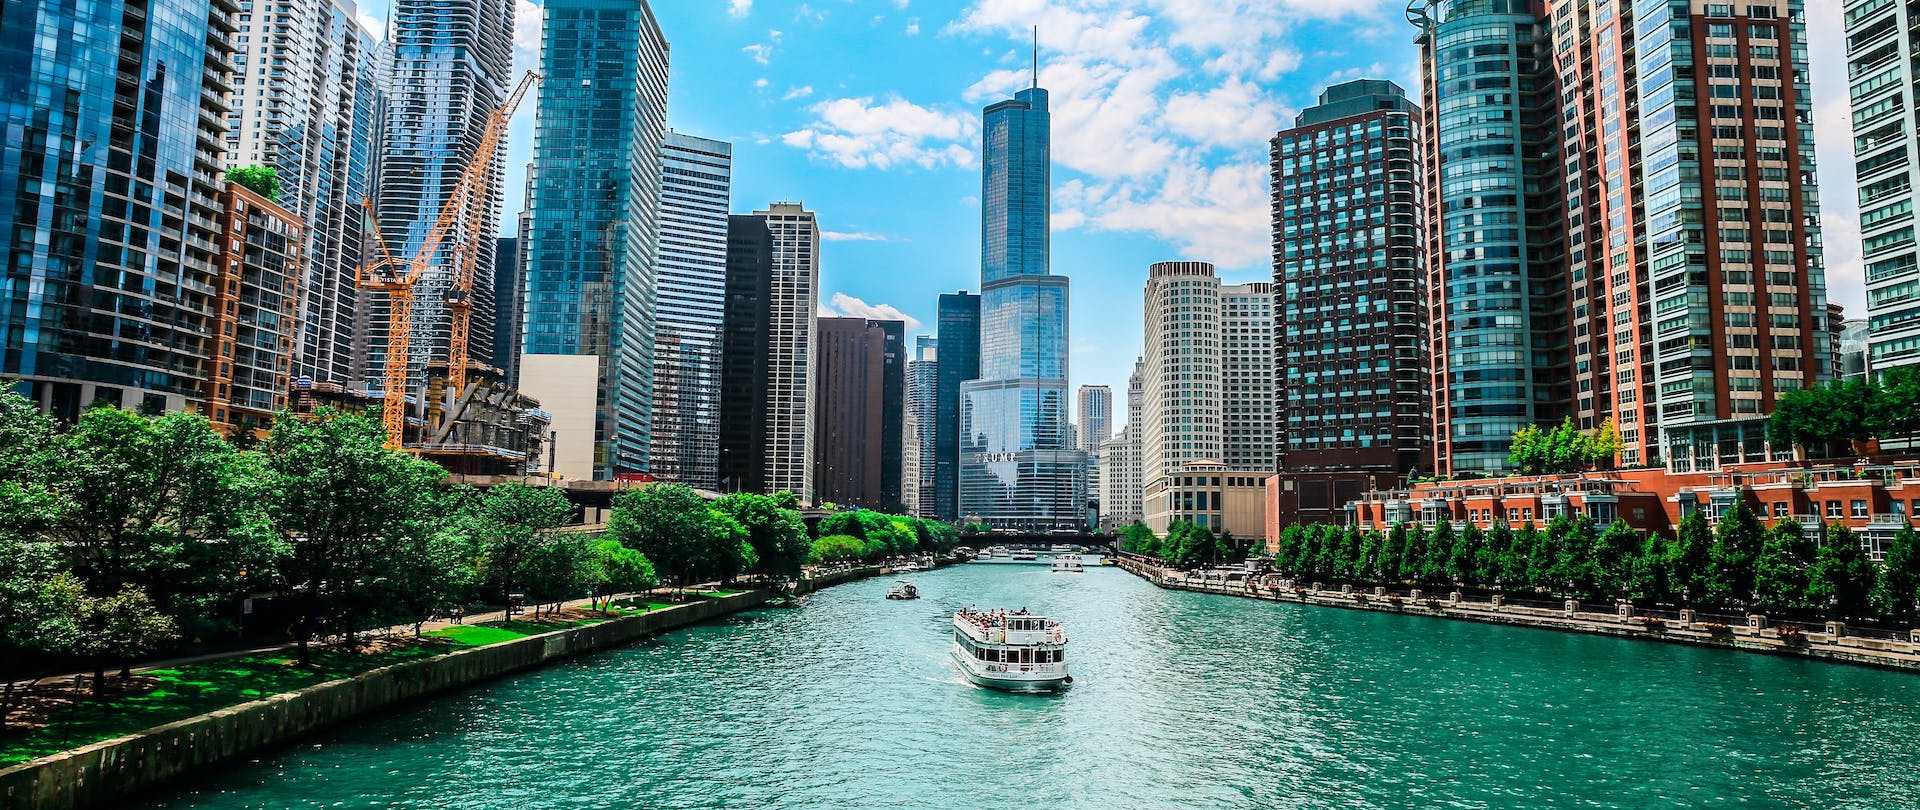 The Important Facts About Chicago Water Quality